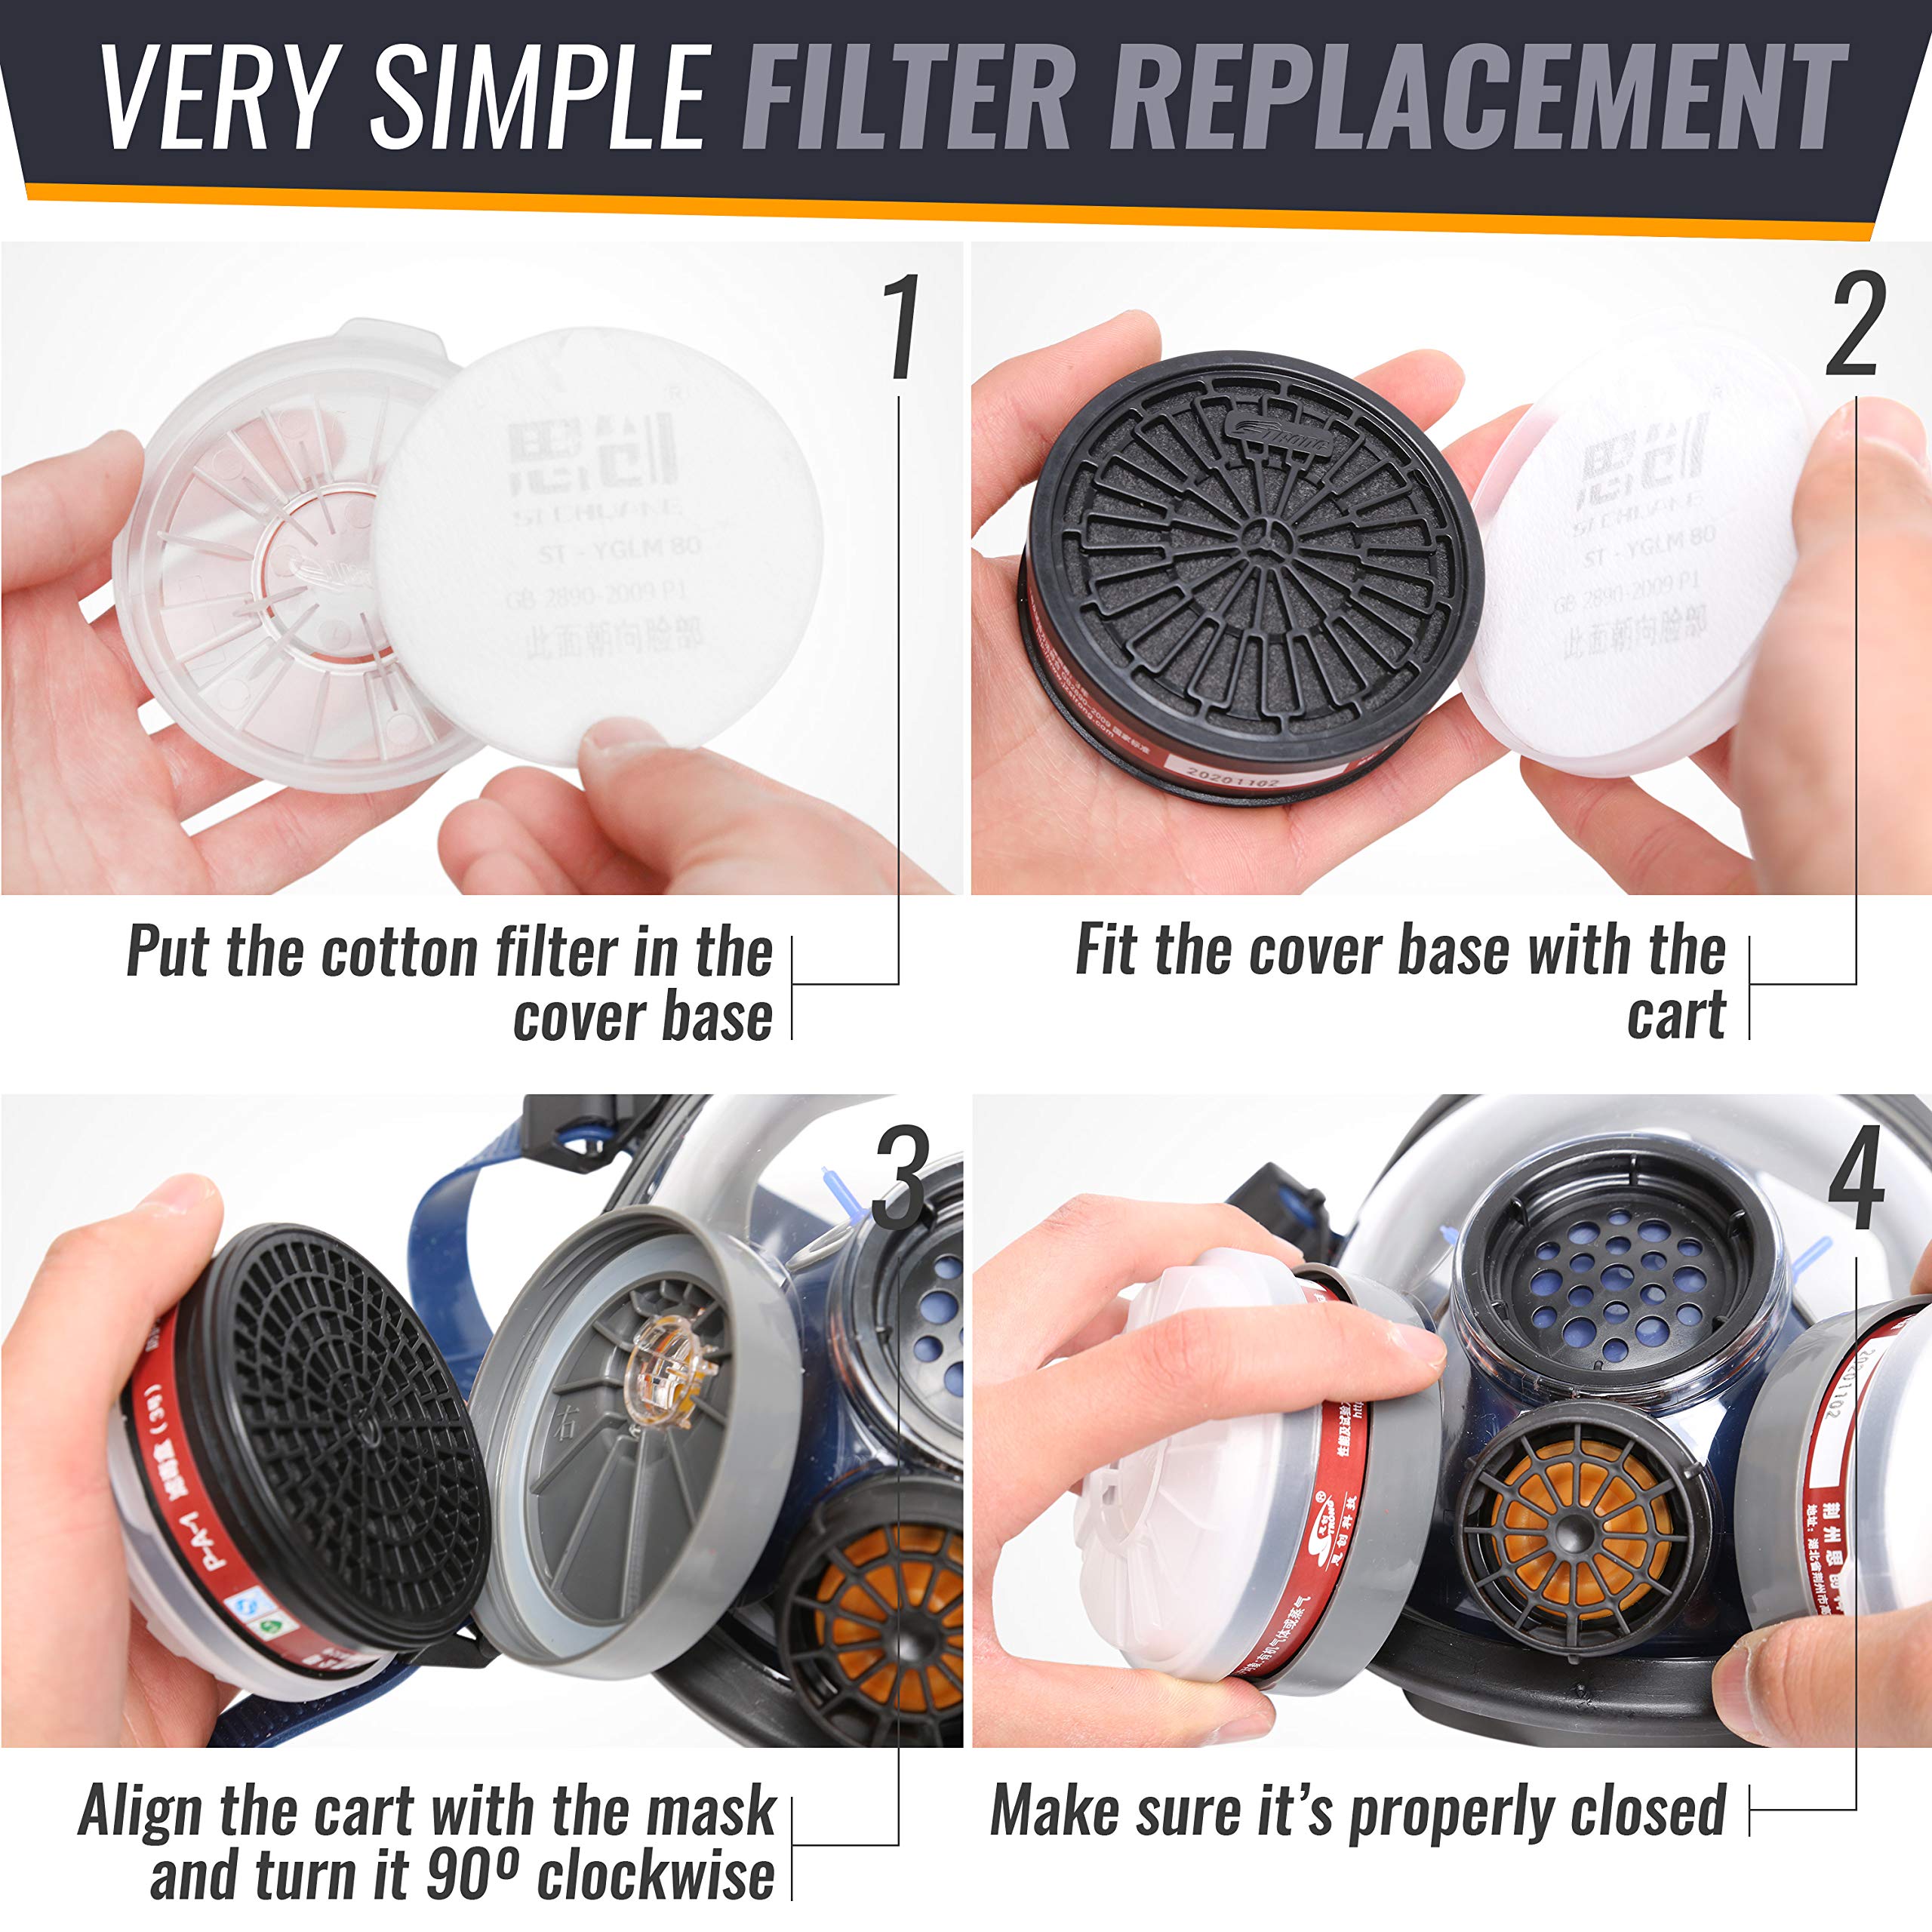 Replaceable Filter Cartridges Set - P-A-1 LDY3 Dual Respirator Filters - Fits Full Face Masks 80mm - 4 Carbon Filter Cartridges, 4 Cotton Filters, 4 Filter Covers. (4 Sets)